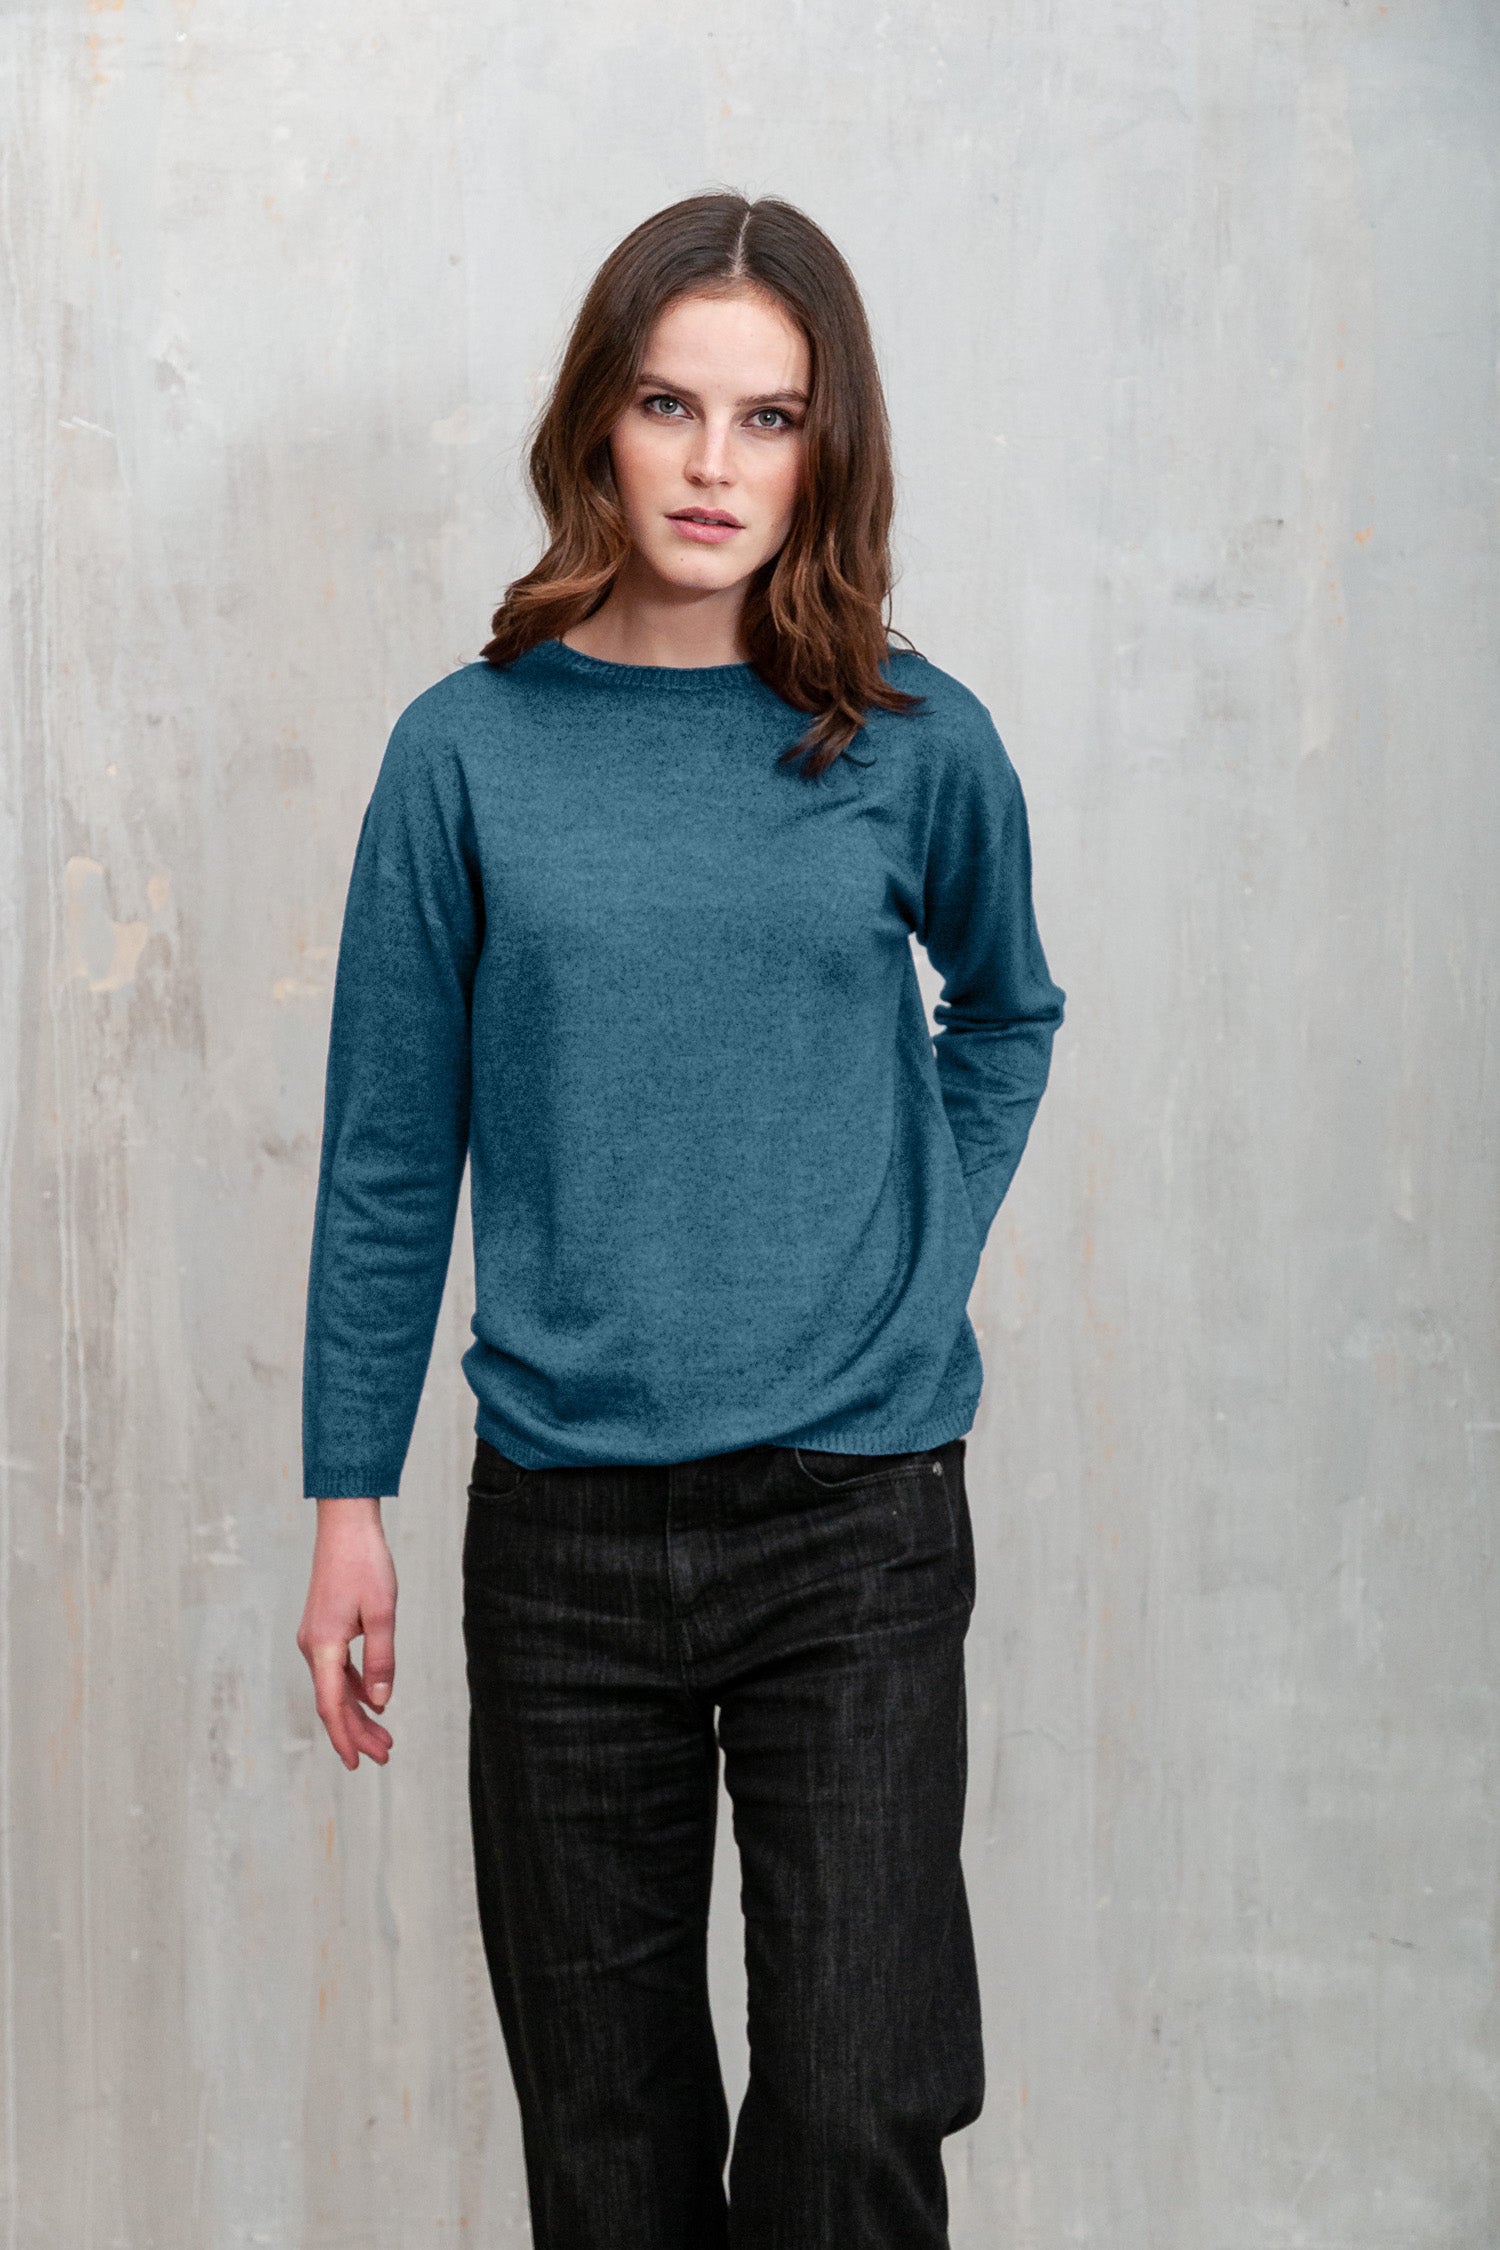 Reay Comfy Sweater - Overcast